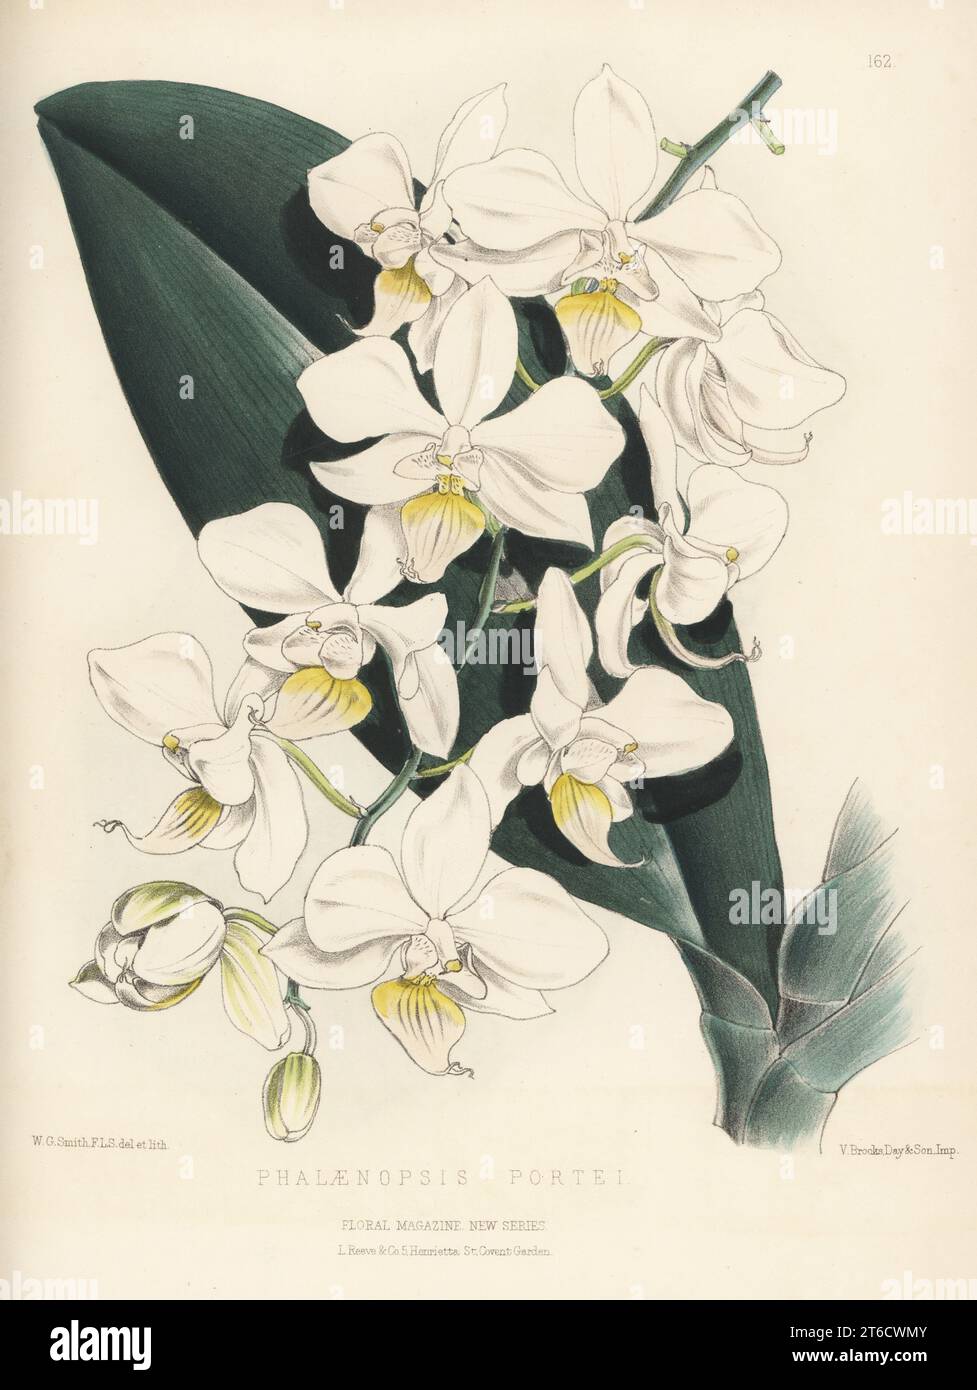 Intermediate phalaenopsis, Phalaenopsis × intermedia, naturally occurring hybrid of epiphytic orchid endemic to the Philippines. Hybrid of Phalaenopsis aphrodite and P. equestris, raised by William Denning, gardener to Lord Londesborough. As Phalaenopsis portei. Handcolored botanical illustration drawn and lithographed by Worthington George Smith from Henry Honywood Dombrain's Floral Magazine, New Series, Volume 3, L. Reeve, London, 1874. Lithograph printed by Vincent Brooks, Day & Son. Stock Photo